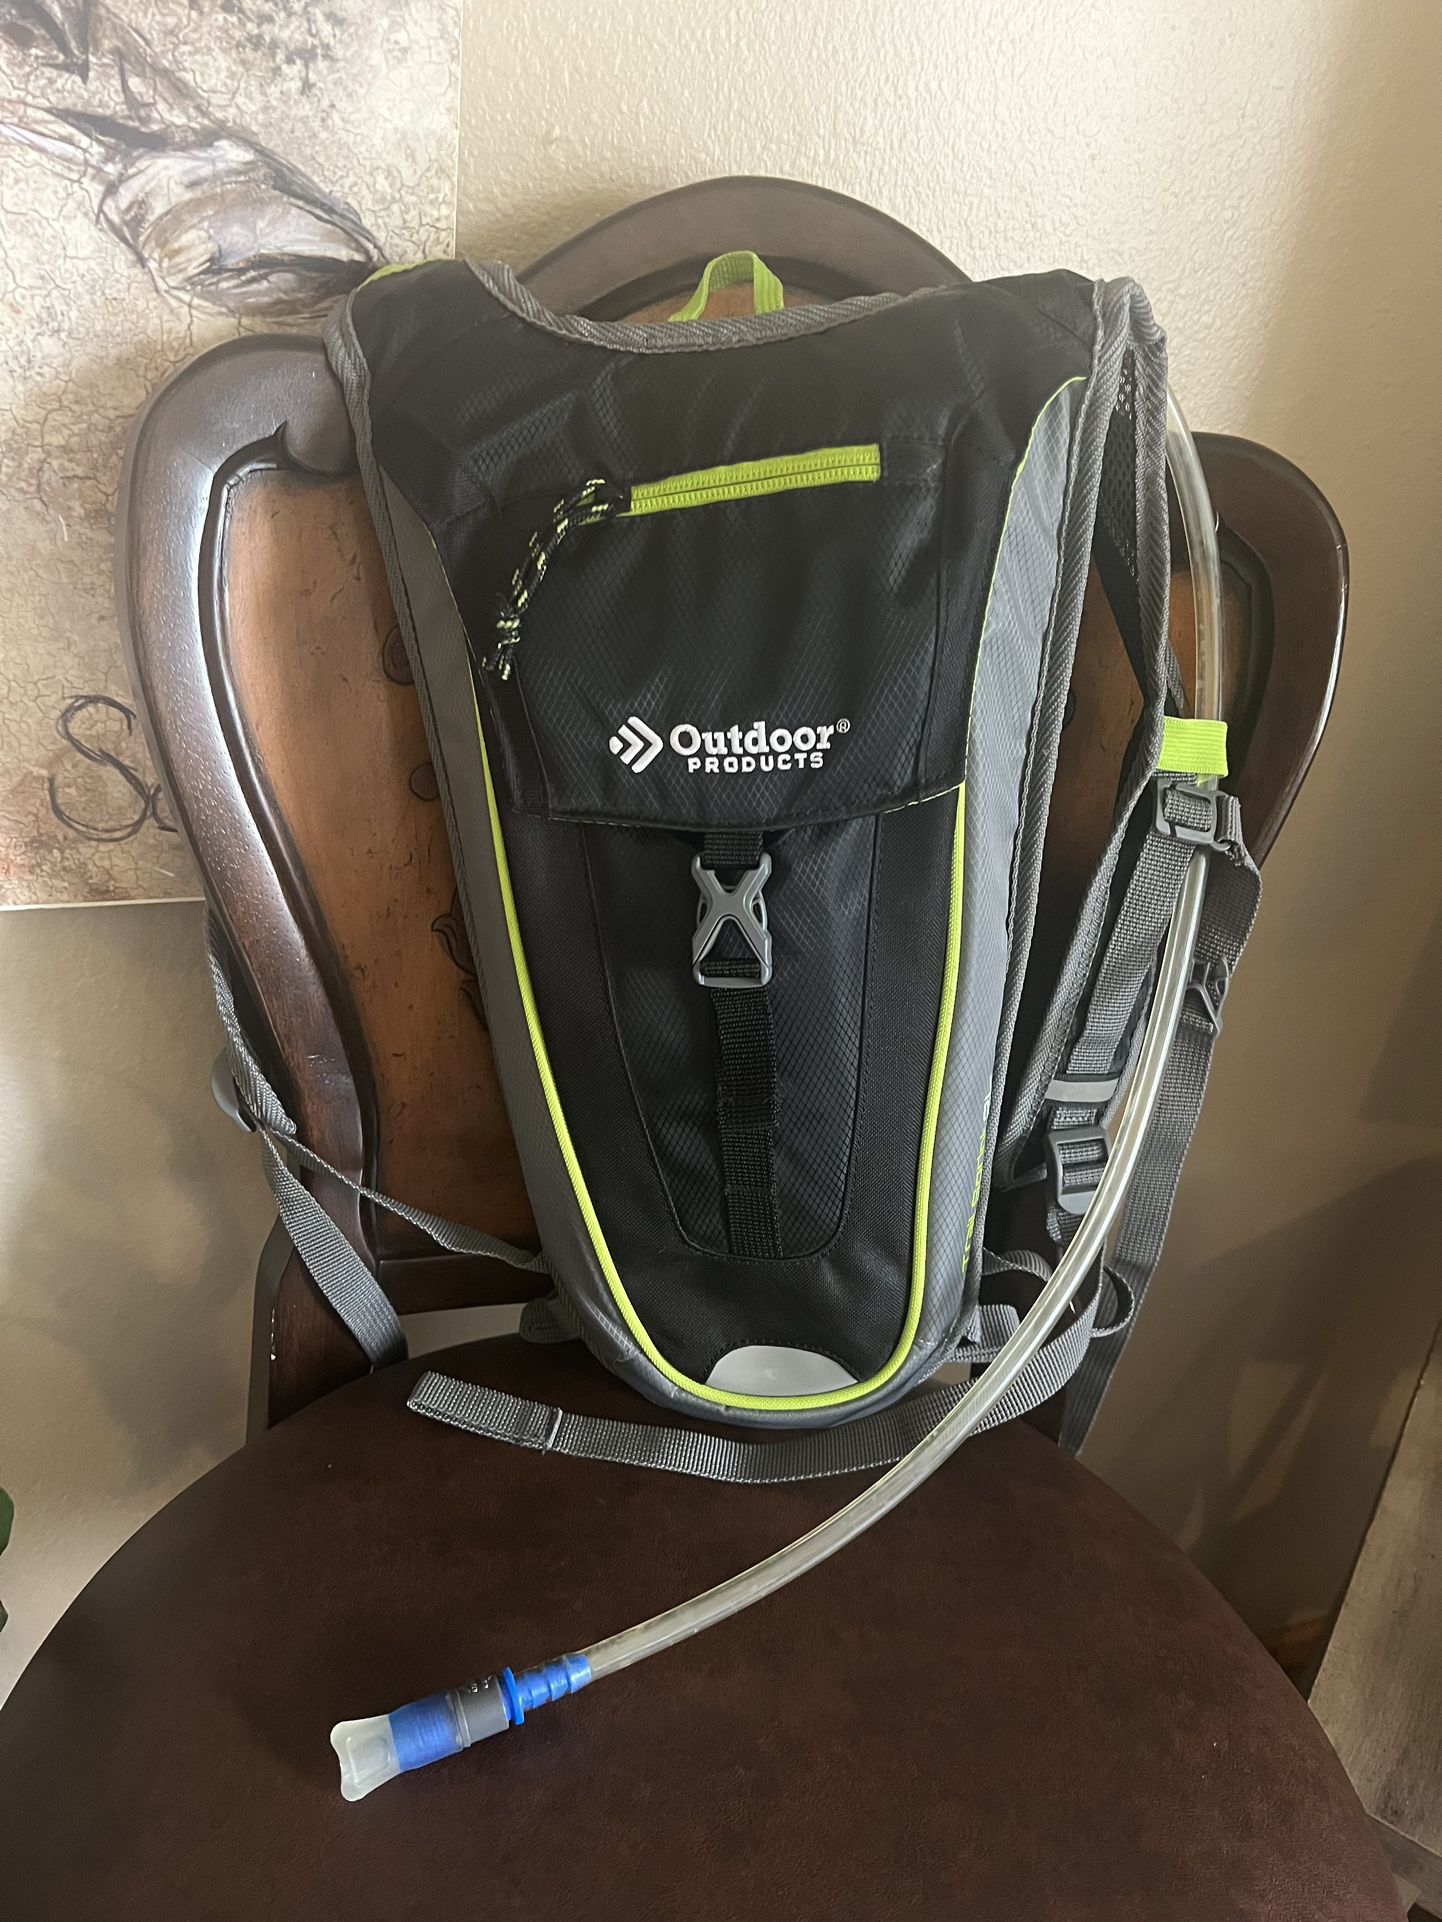 Used Twice! Hiking Bladder Backpack For Water In New Condition! See All Photos 